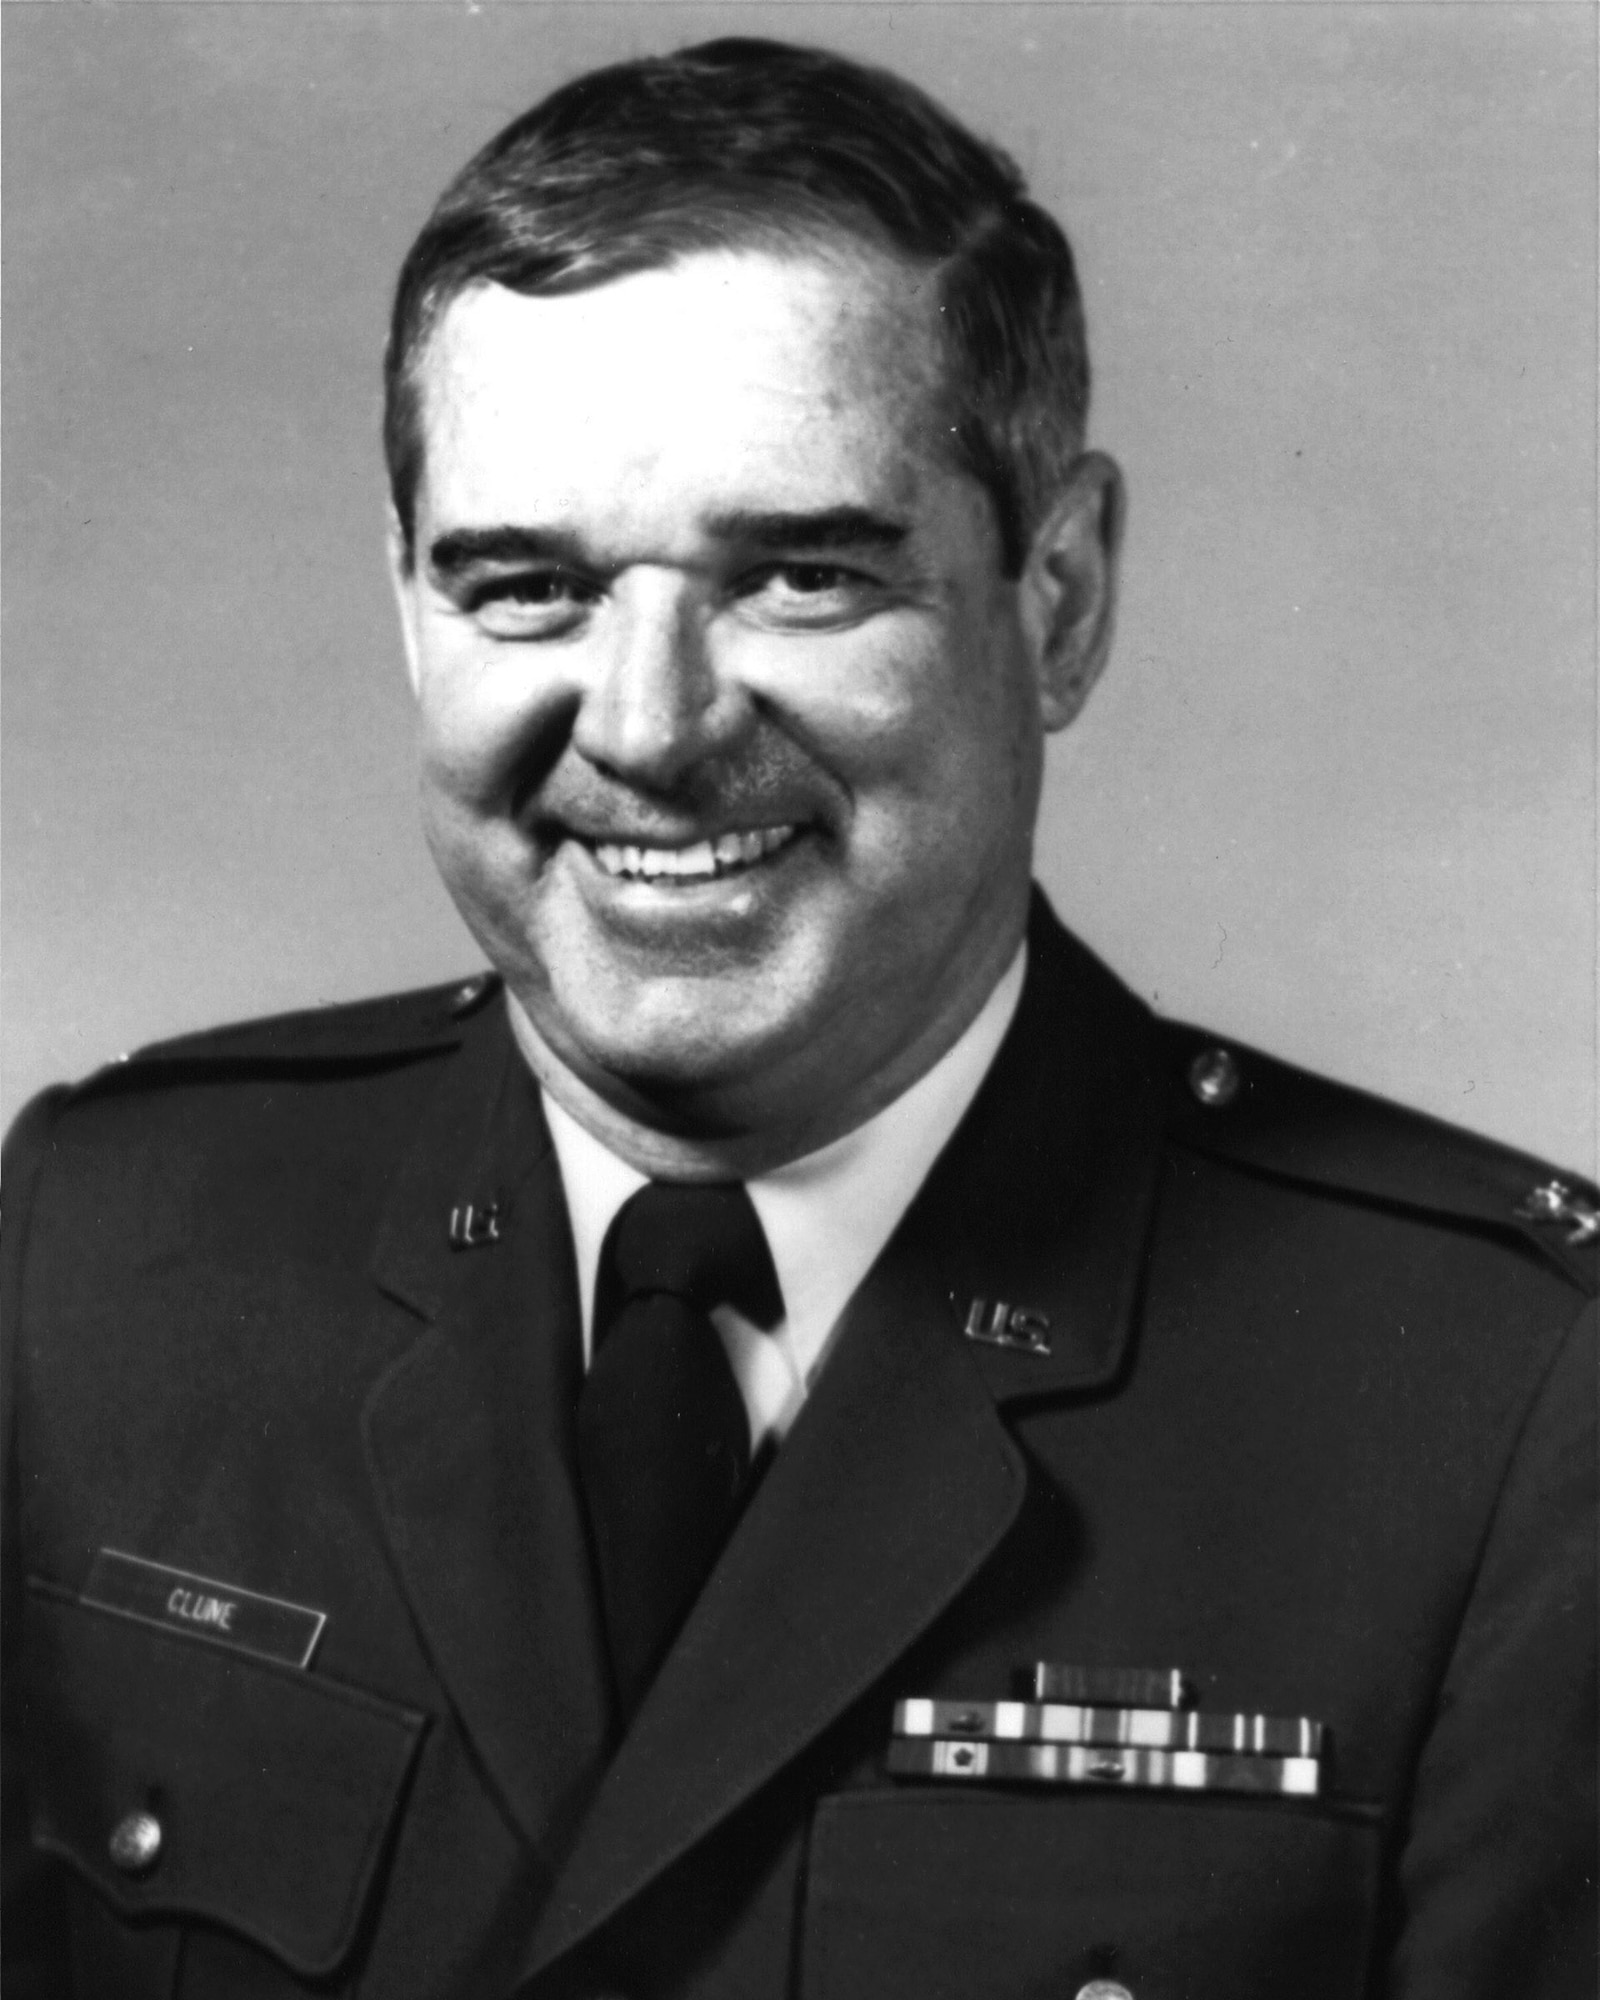 Retired Col. John Clune, an All-American basketball player, is in the inaugural class being inducted into the Air Force Academy Athletic Hall of Fame. Among his achievements was serving as president of the National Association of Collegiate Directors of Athletics. He lost a battle with bone cancer in 1992. In 1993, the Cadet Field House basketball arena was dedicated in his honor. (U.S. Air Force photo)